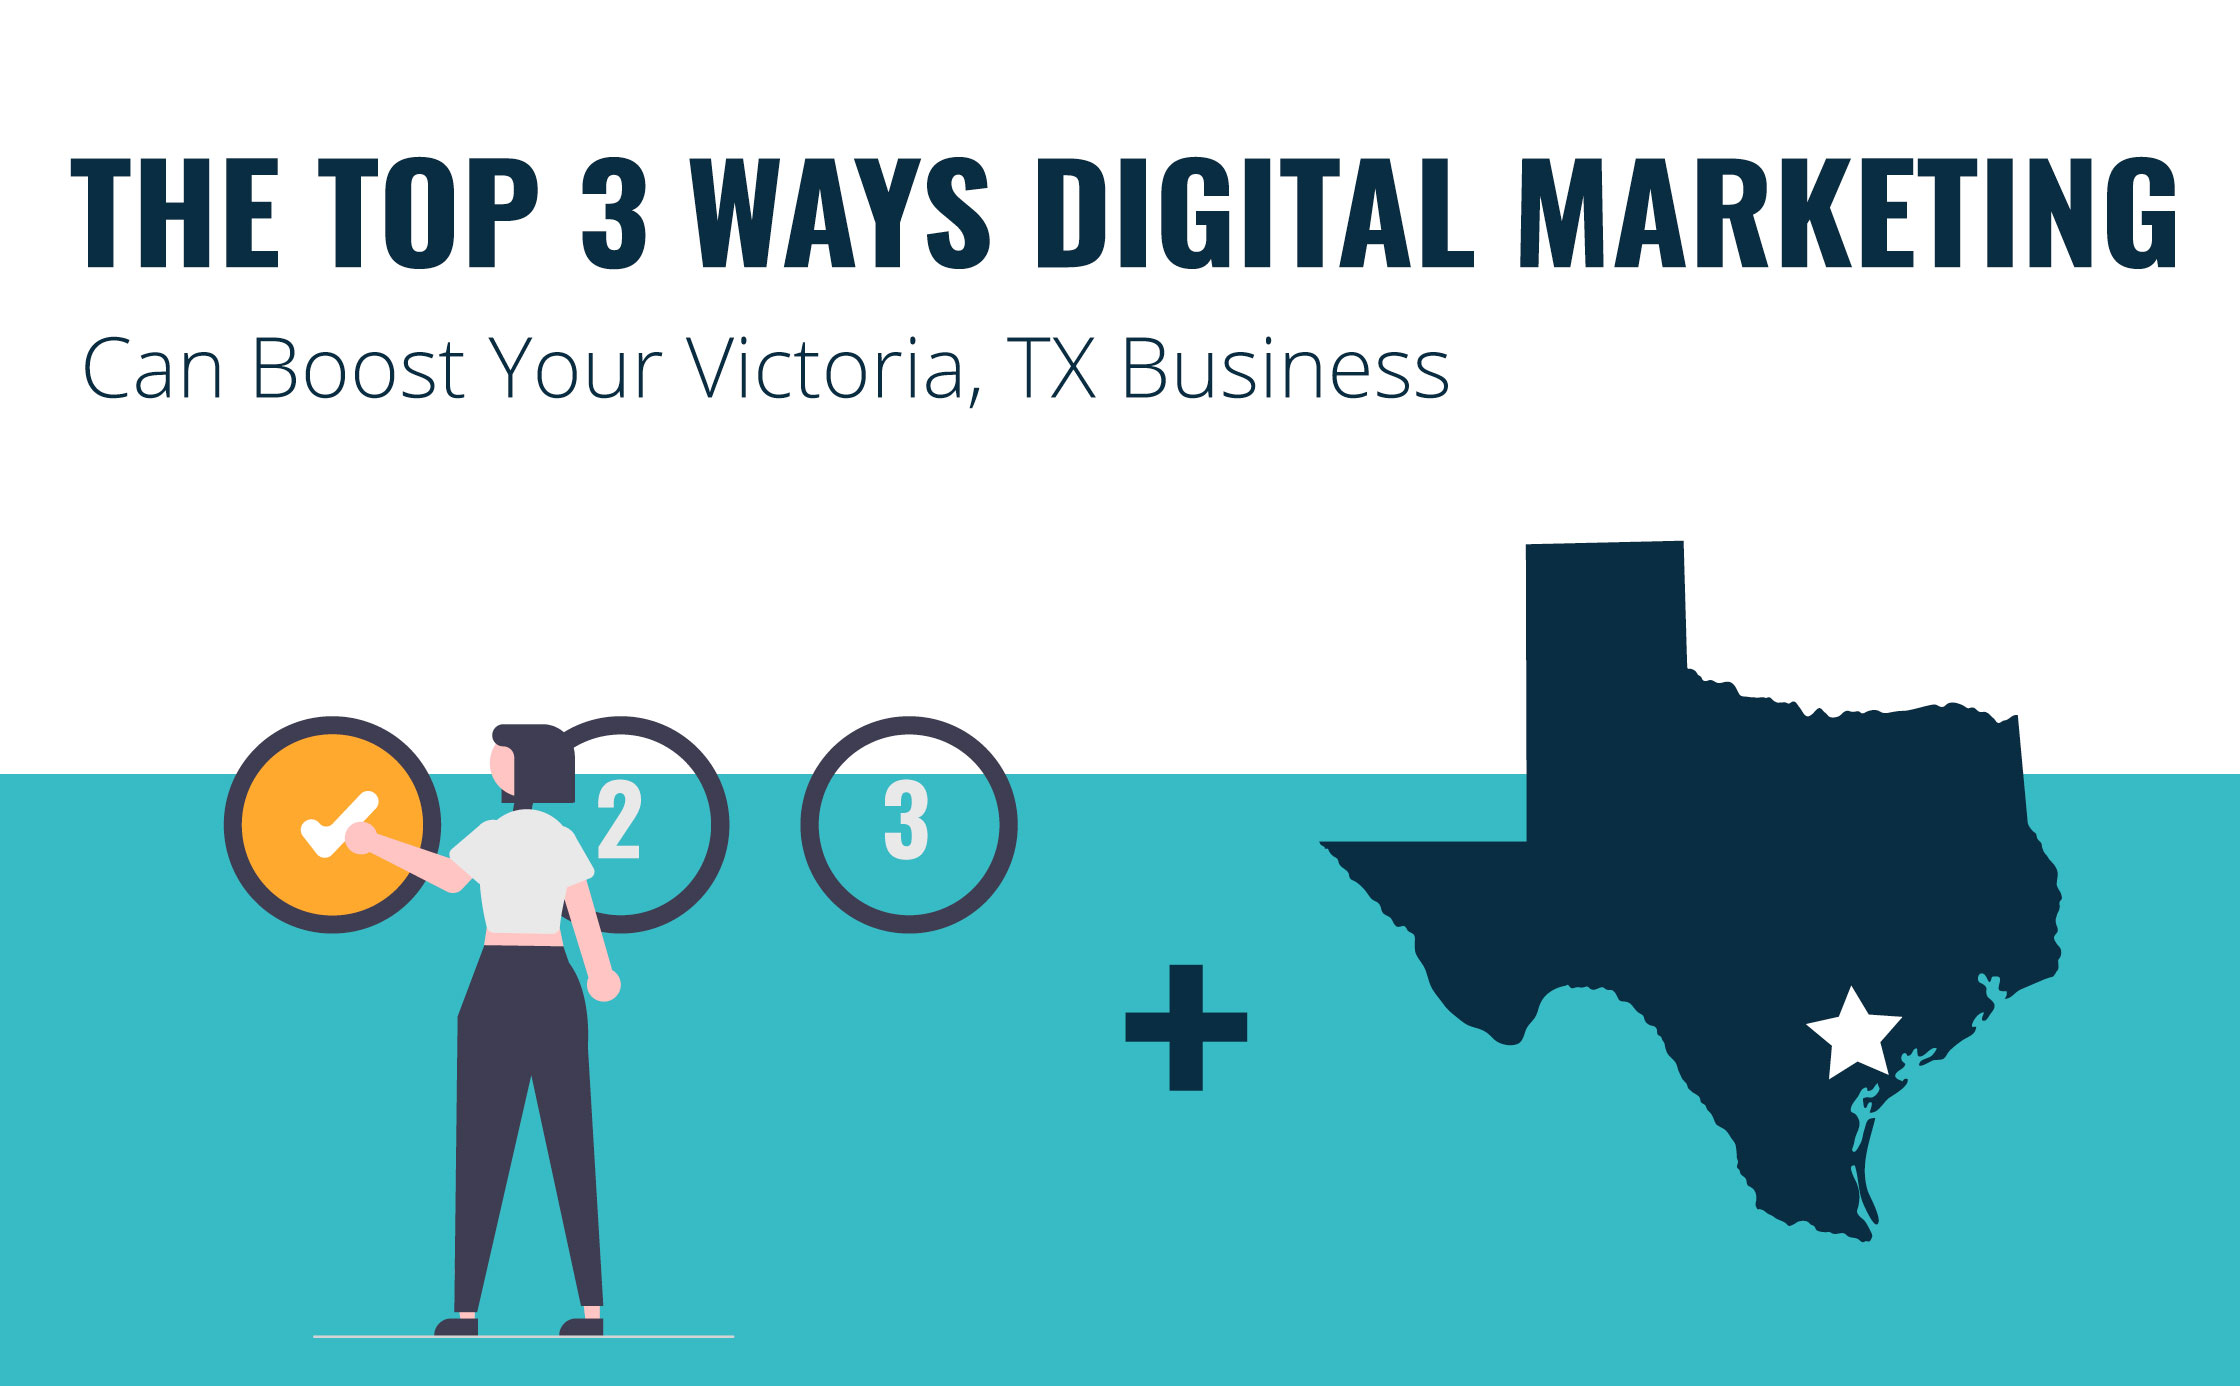 Top 3 Ways Digital Marketing Services Can Boost Your Victoria, TX Business